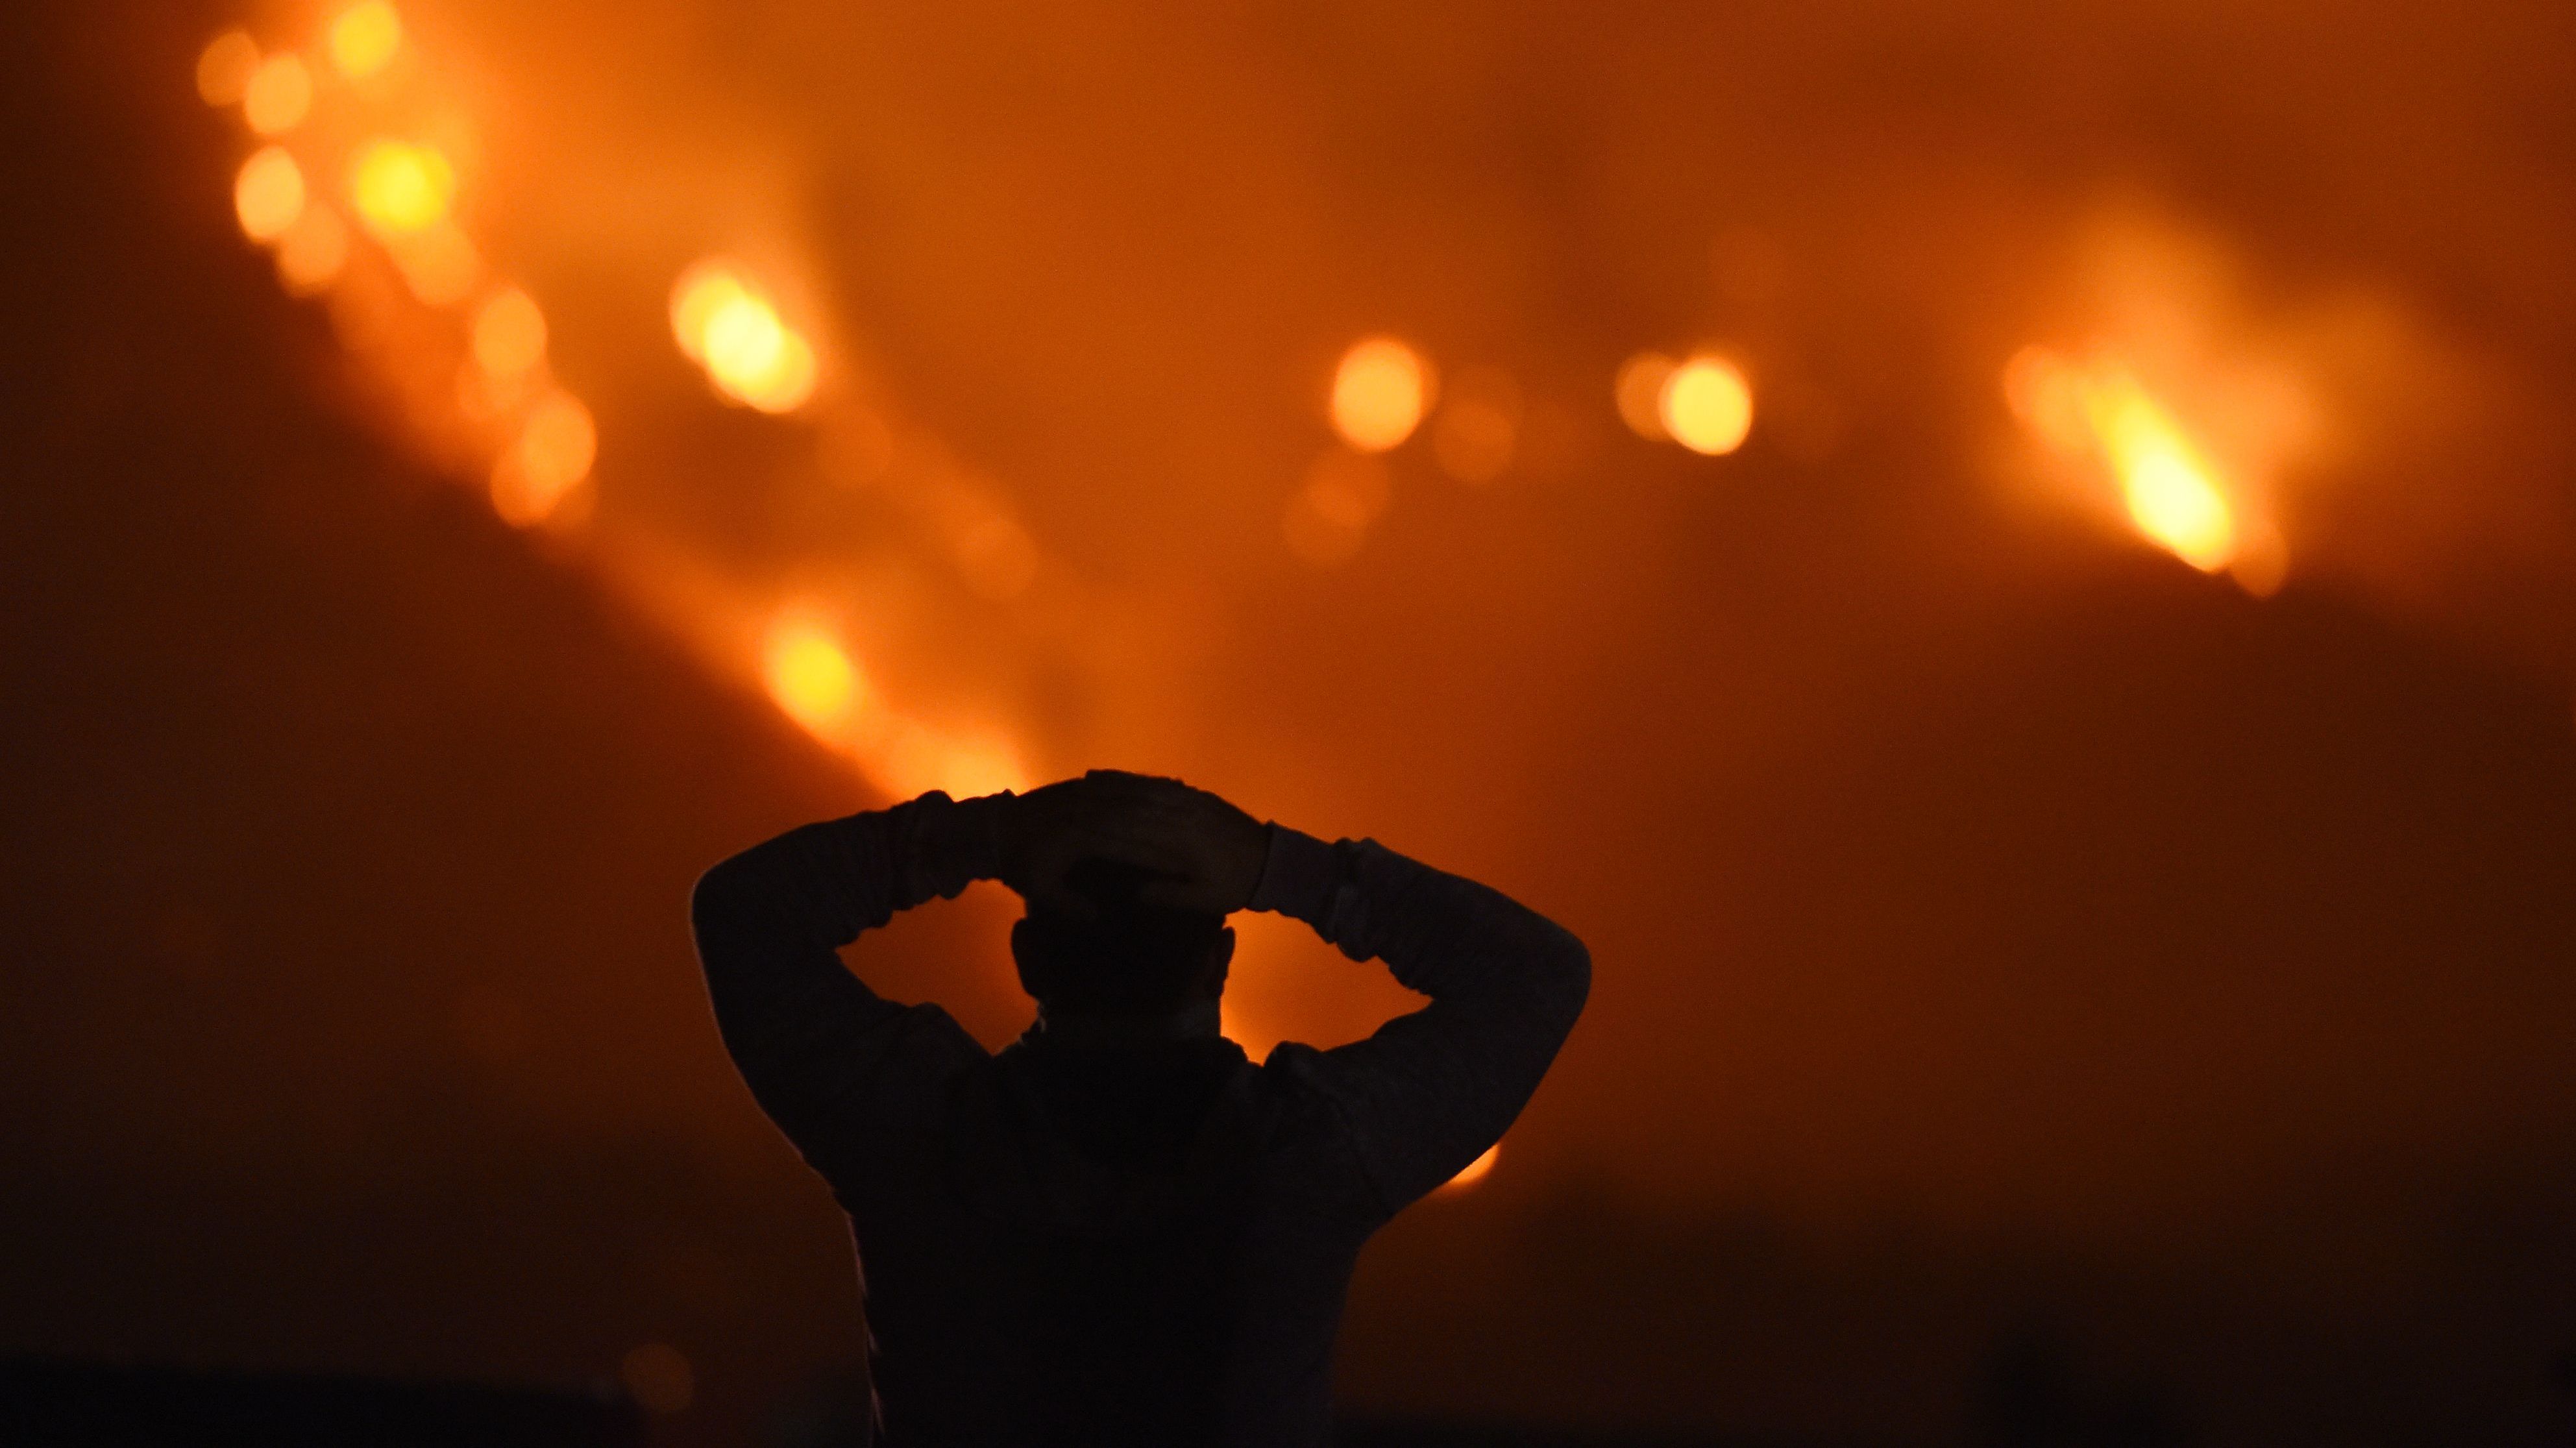 A man watches the Thomas Fire in the hills above Carpinteria, California.